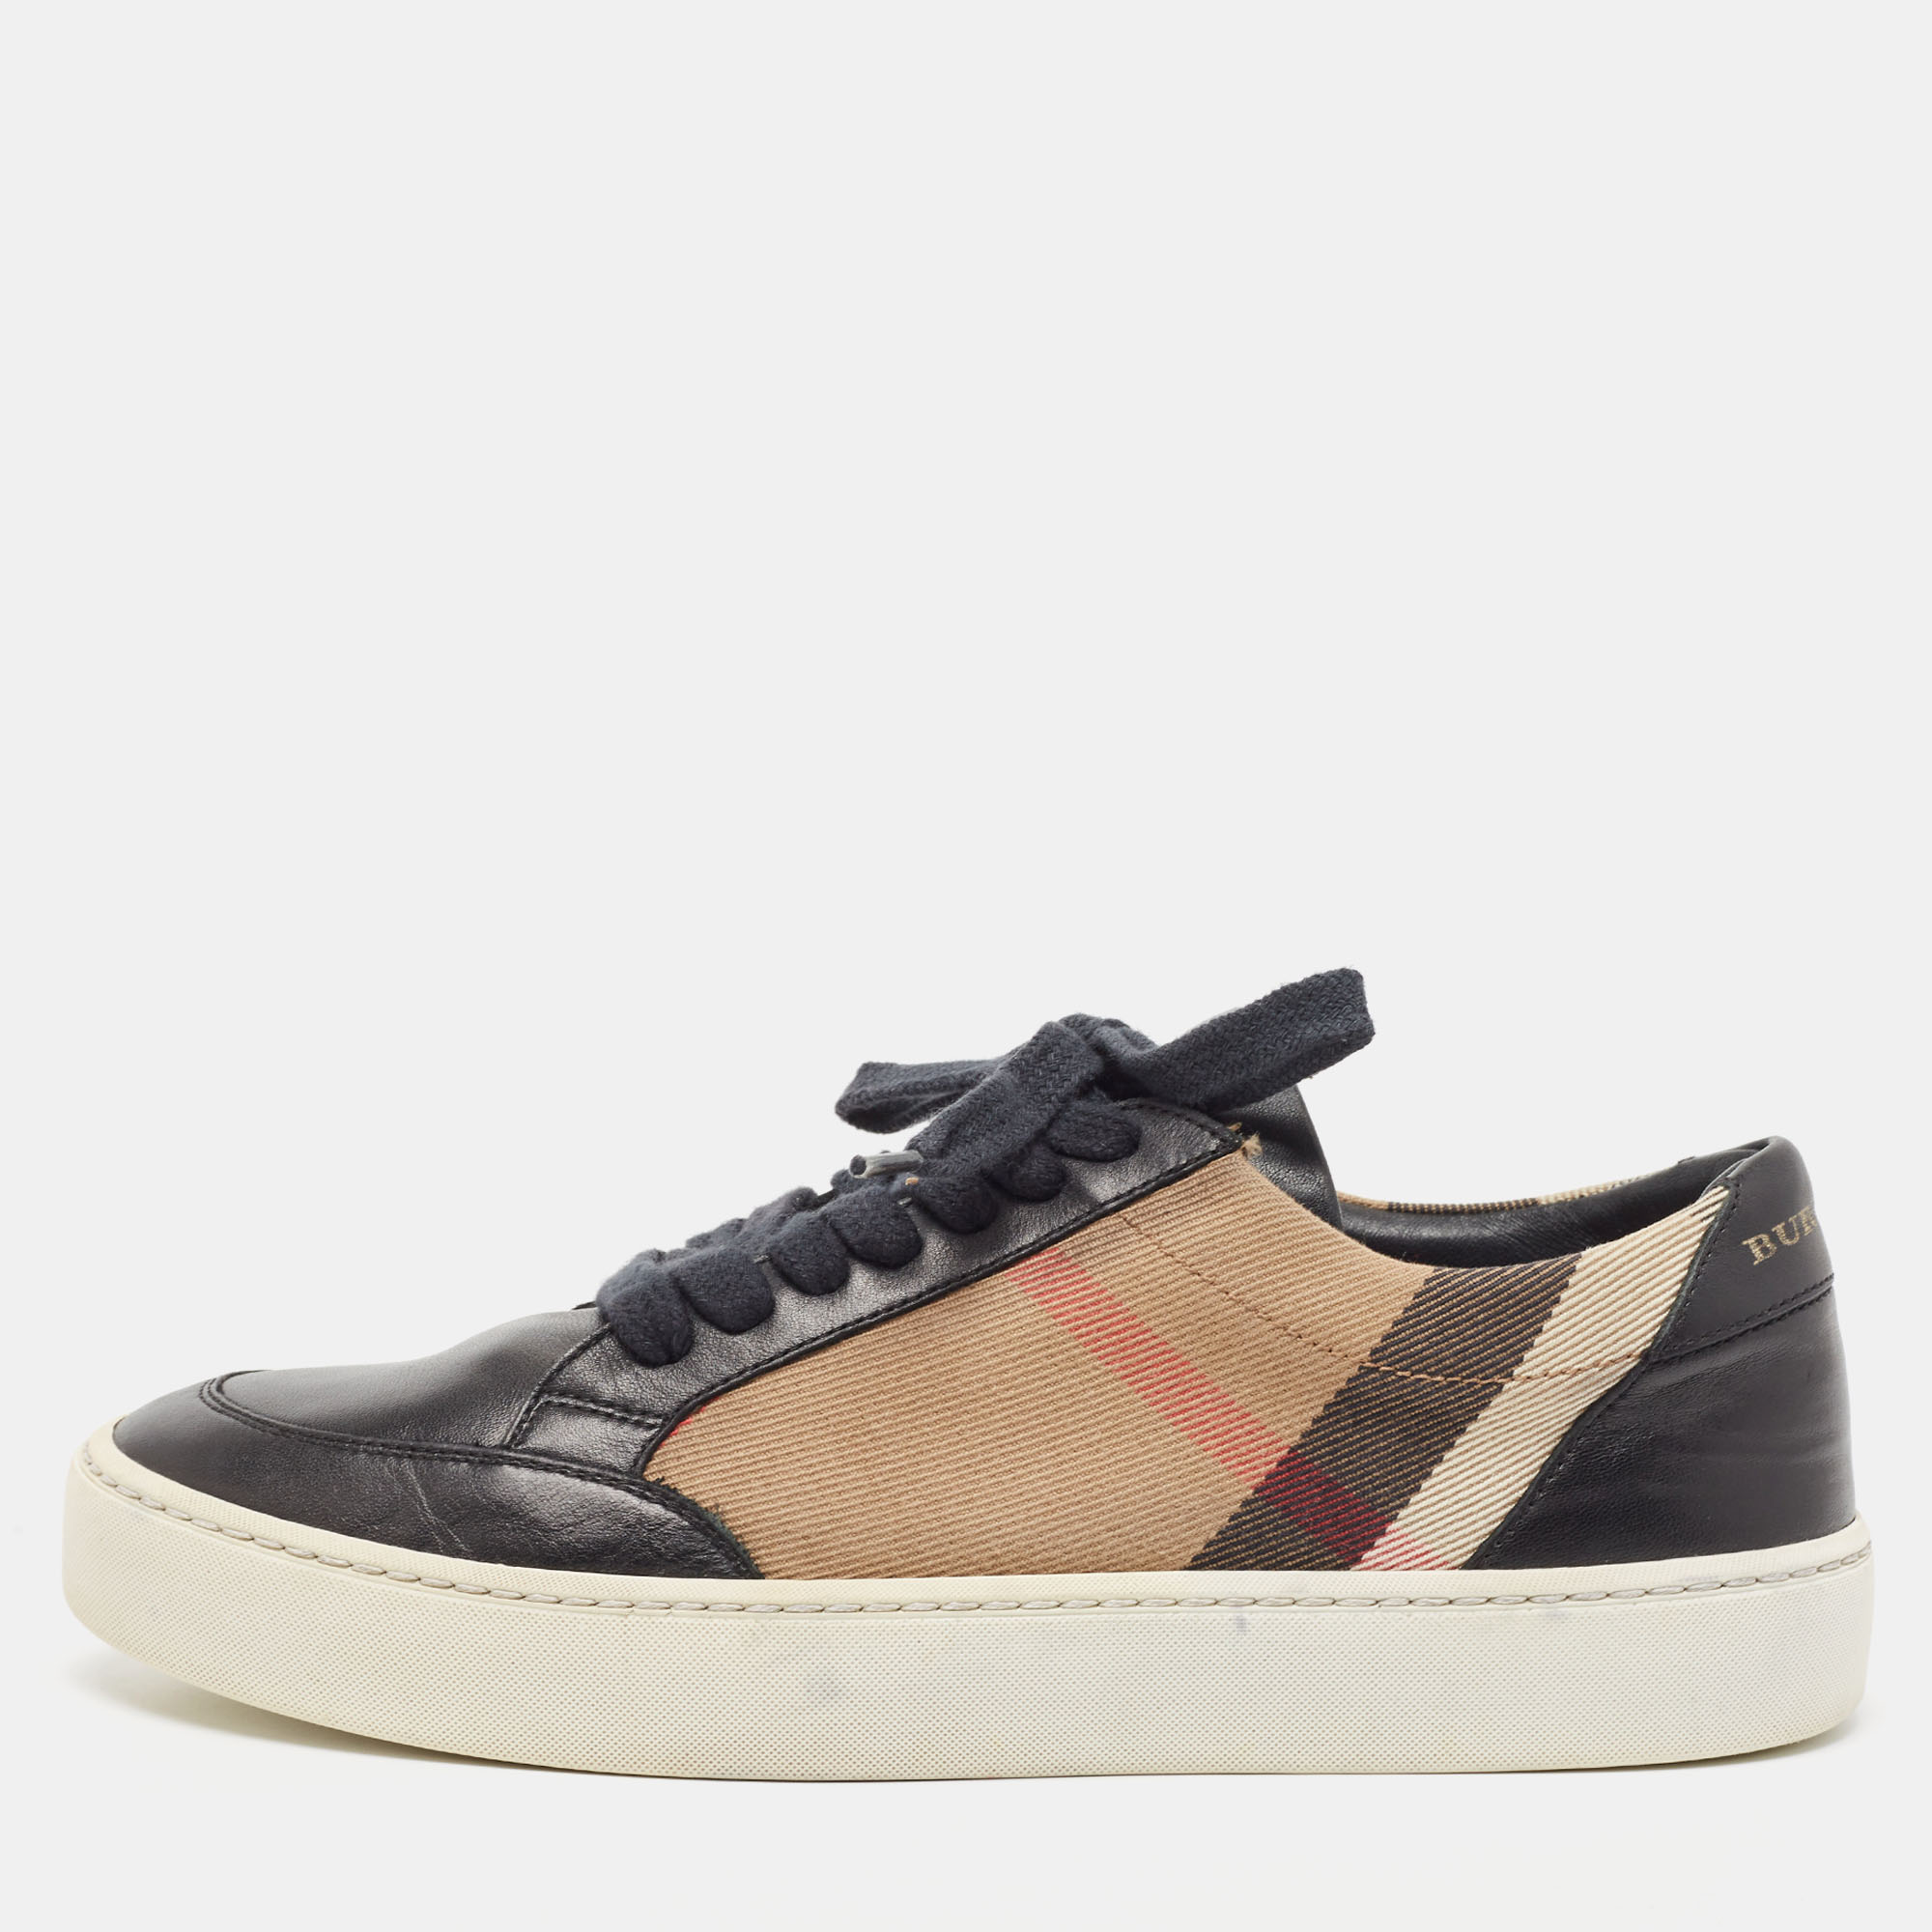 Burberry Black/Beige Nova Check Canvas And Leather Low Top Sneakers Size 36